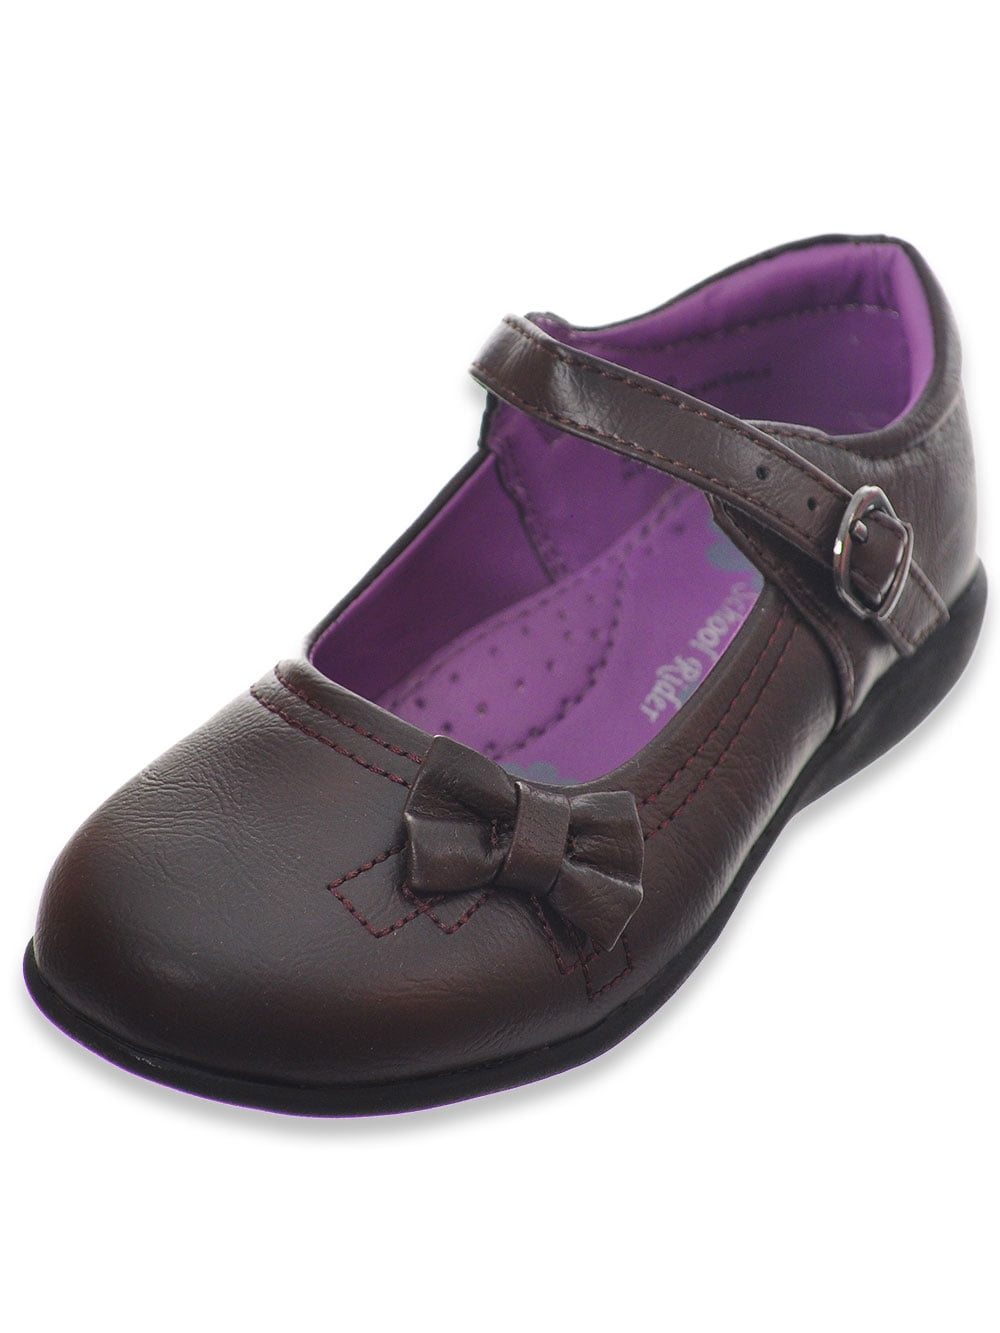 New Rachel Girls School Shoes "Eloise" Black Smooth Toddler & Youth All Sizes 